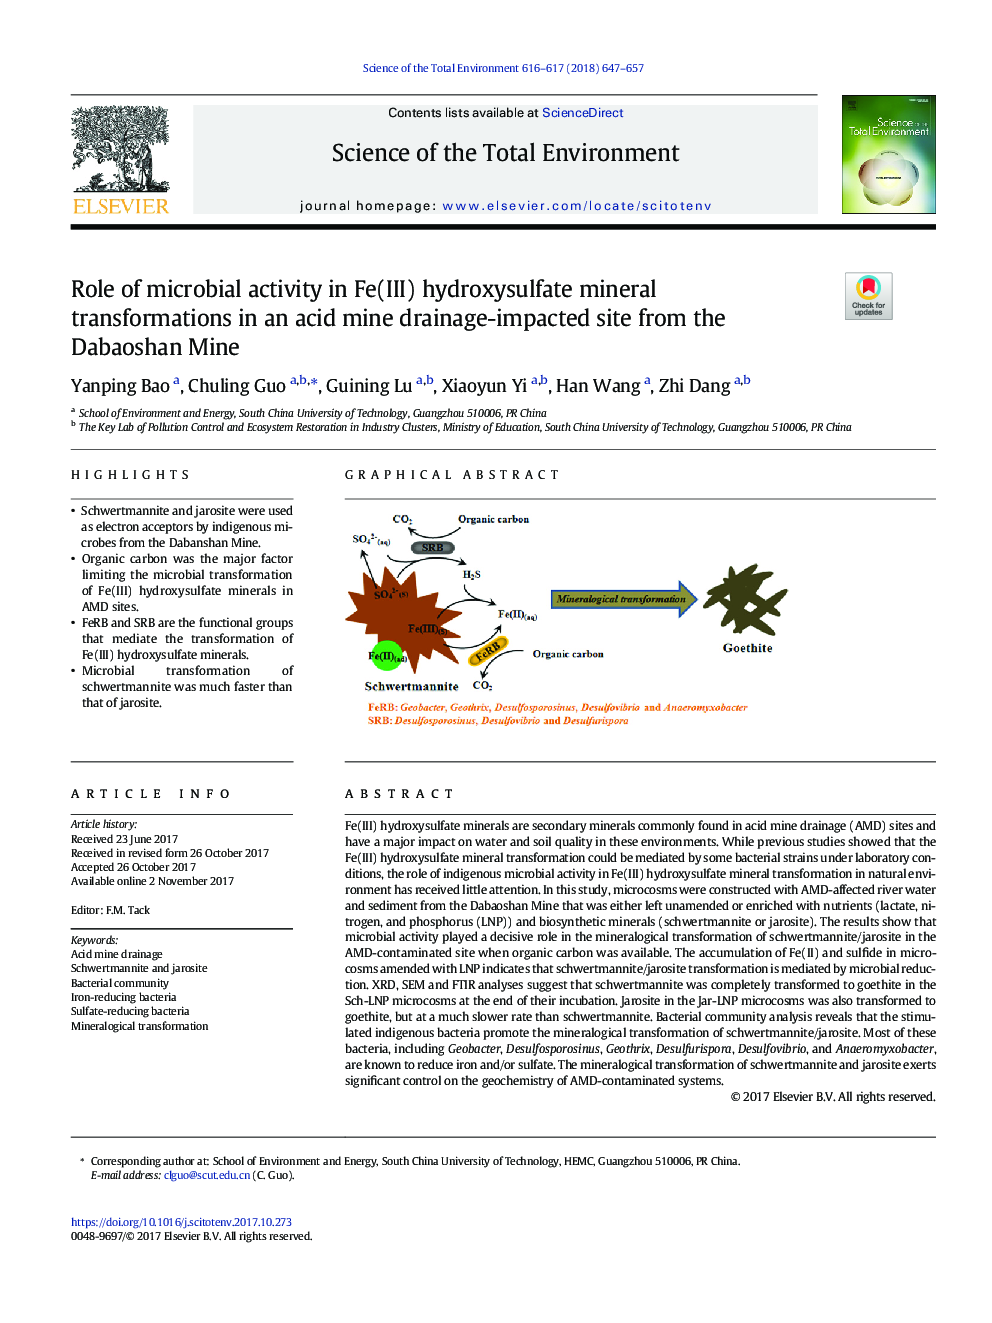 Role of microbial activity in Fe(III) hydroxysulfate mineral transformations in an acid mine drainage-impacted site from the Dabaoshan Mine